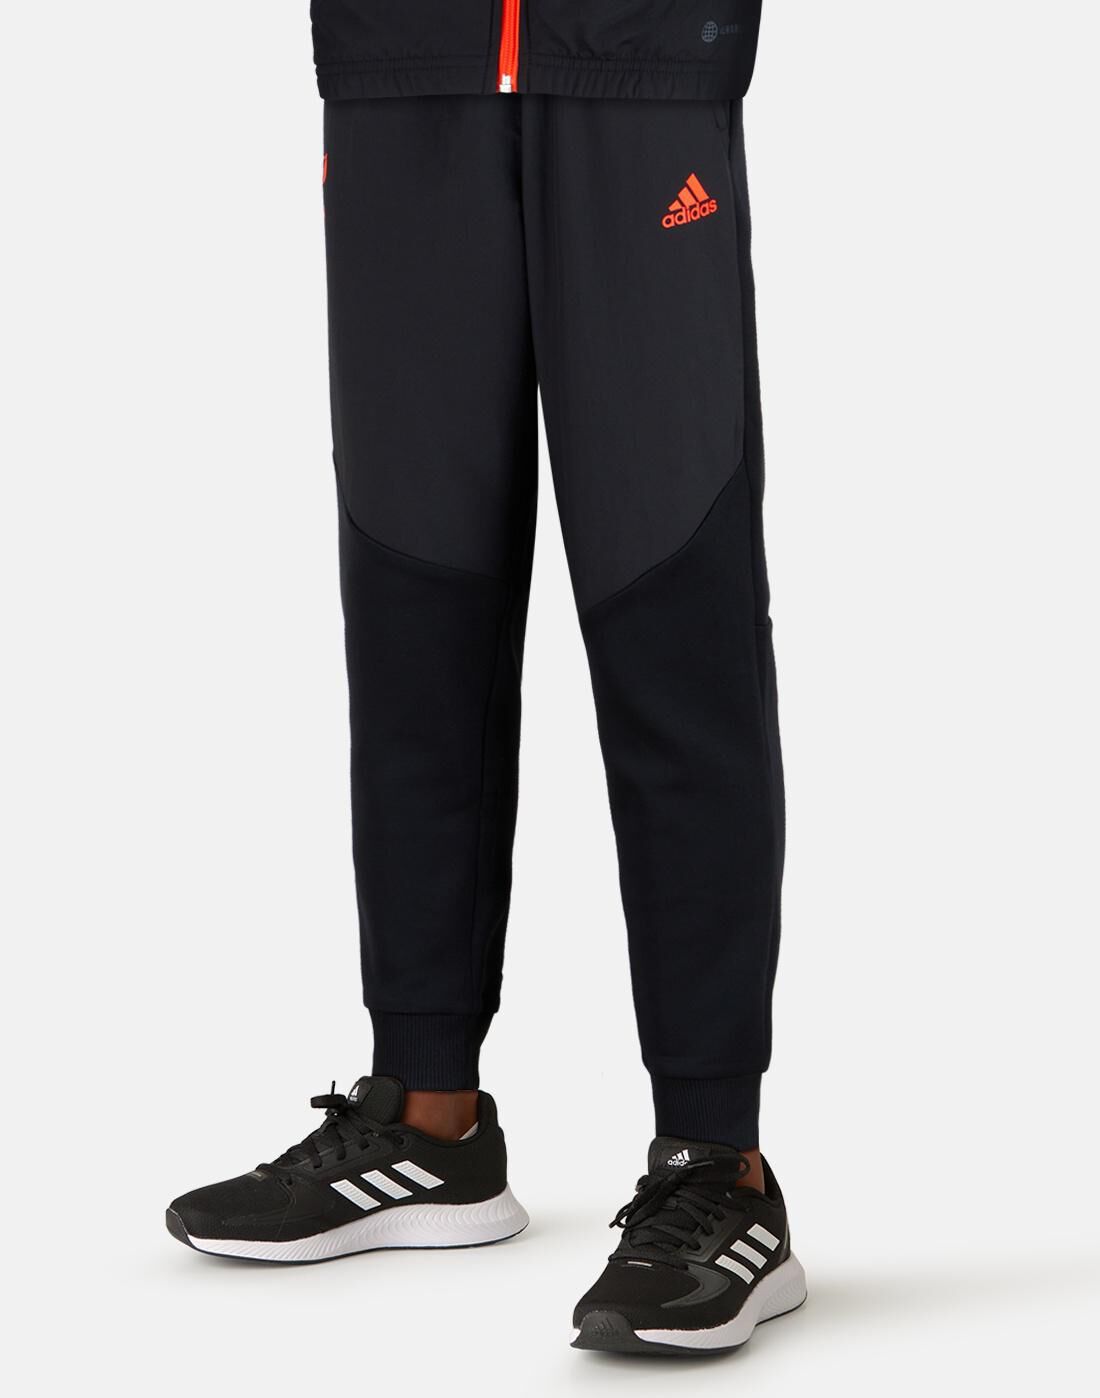 Buy ADIDAS Messi Brand Track Pant for SAR 110.00 | The Deal Outlet